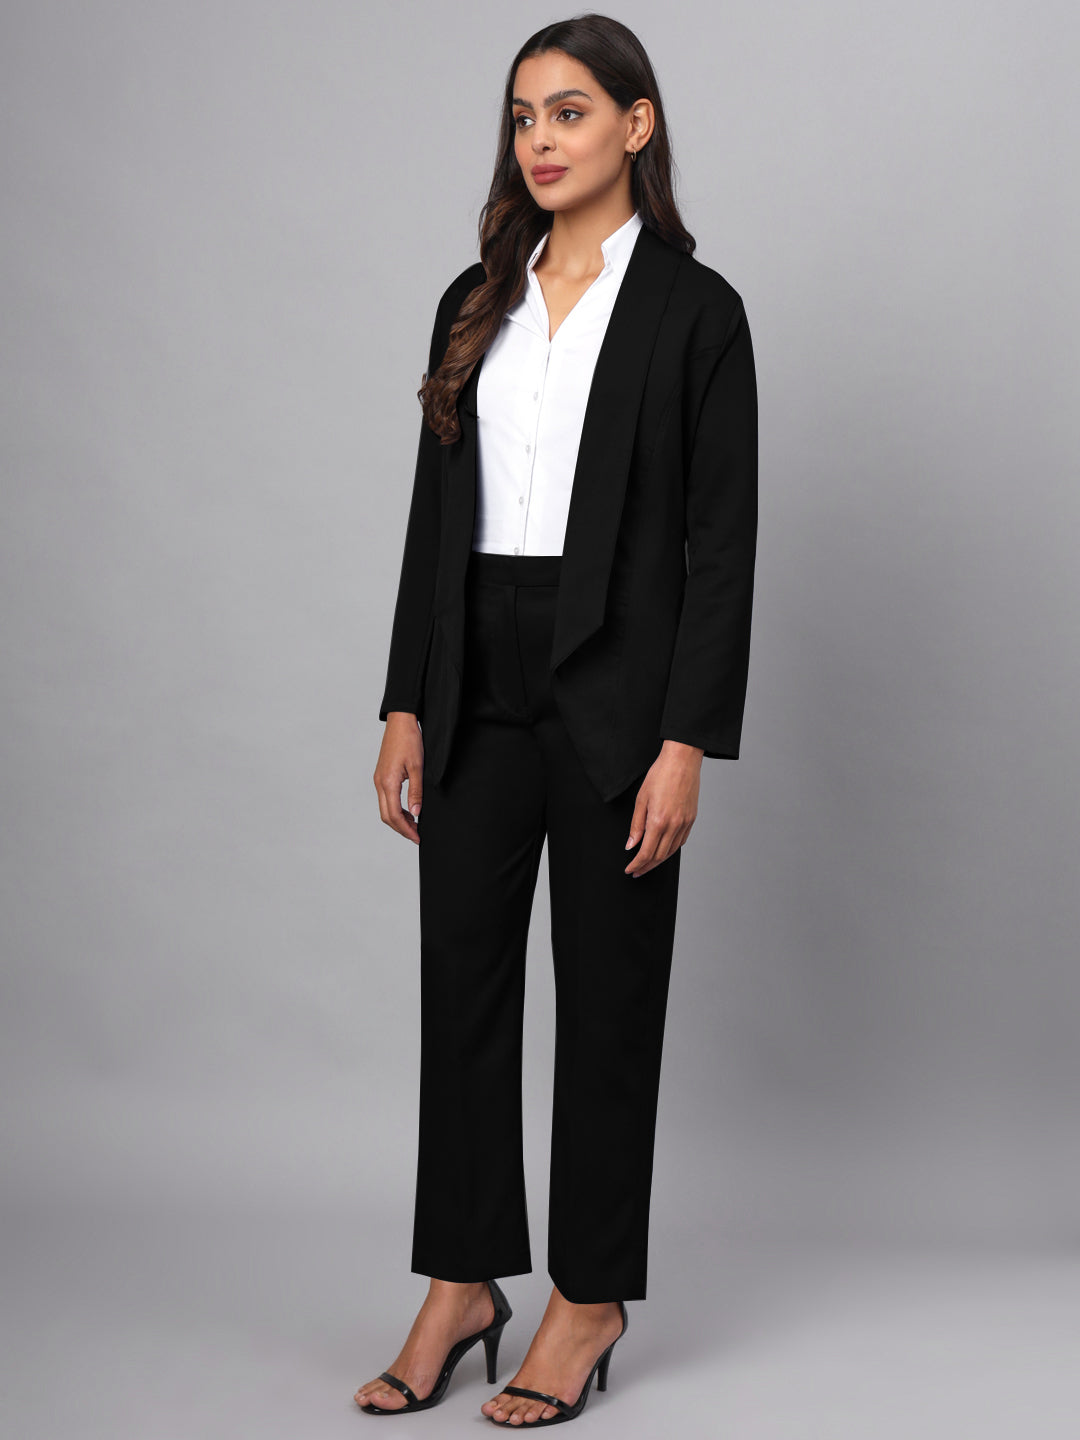 Shawl Collar Blazer With Trousers Two Pieces Formal Suit